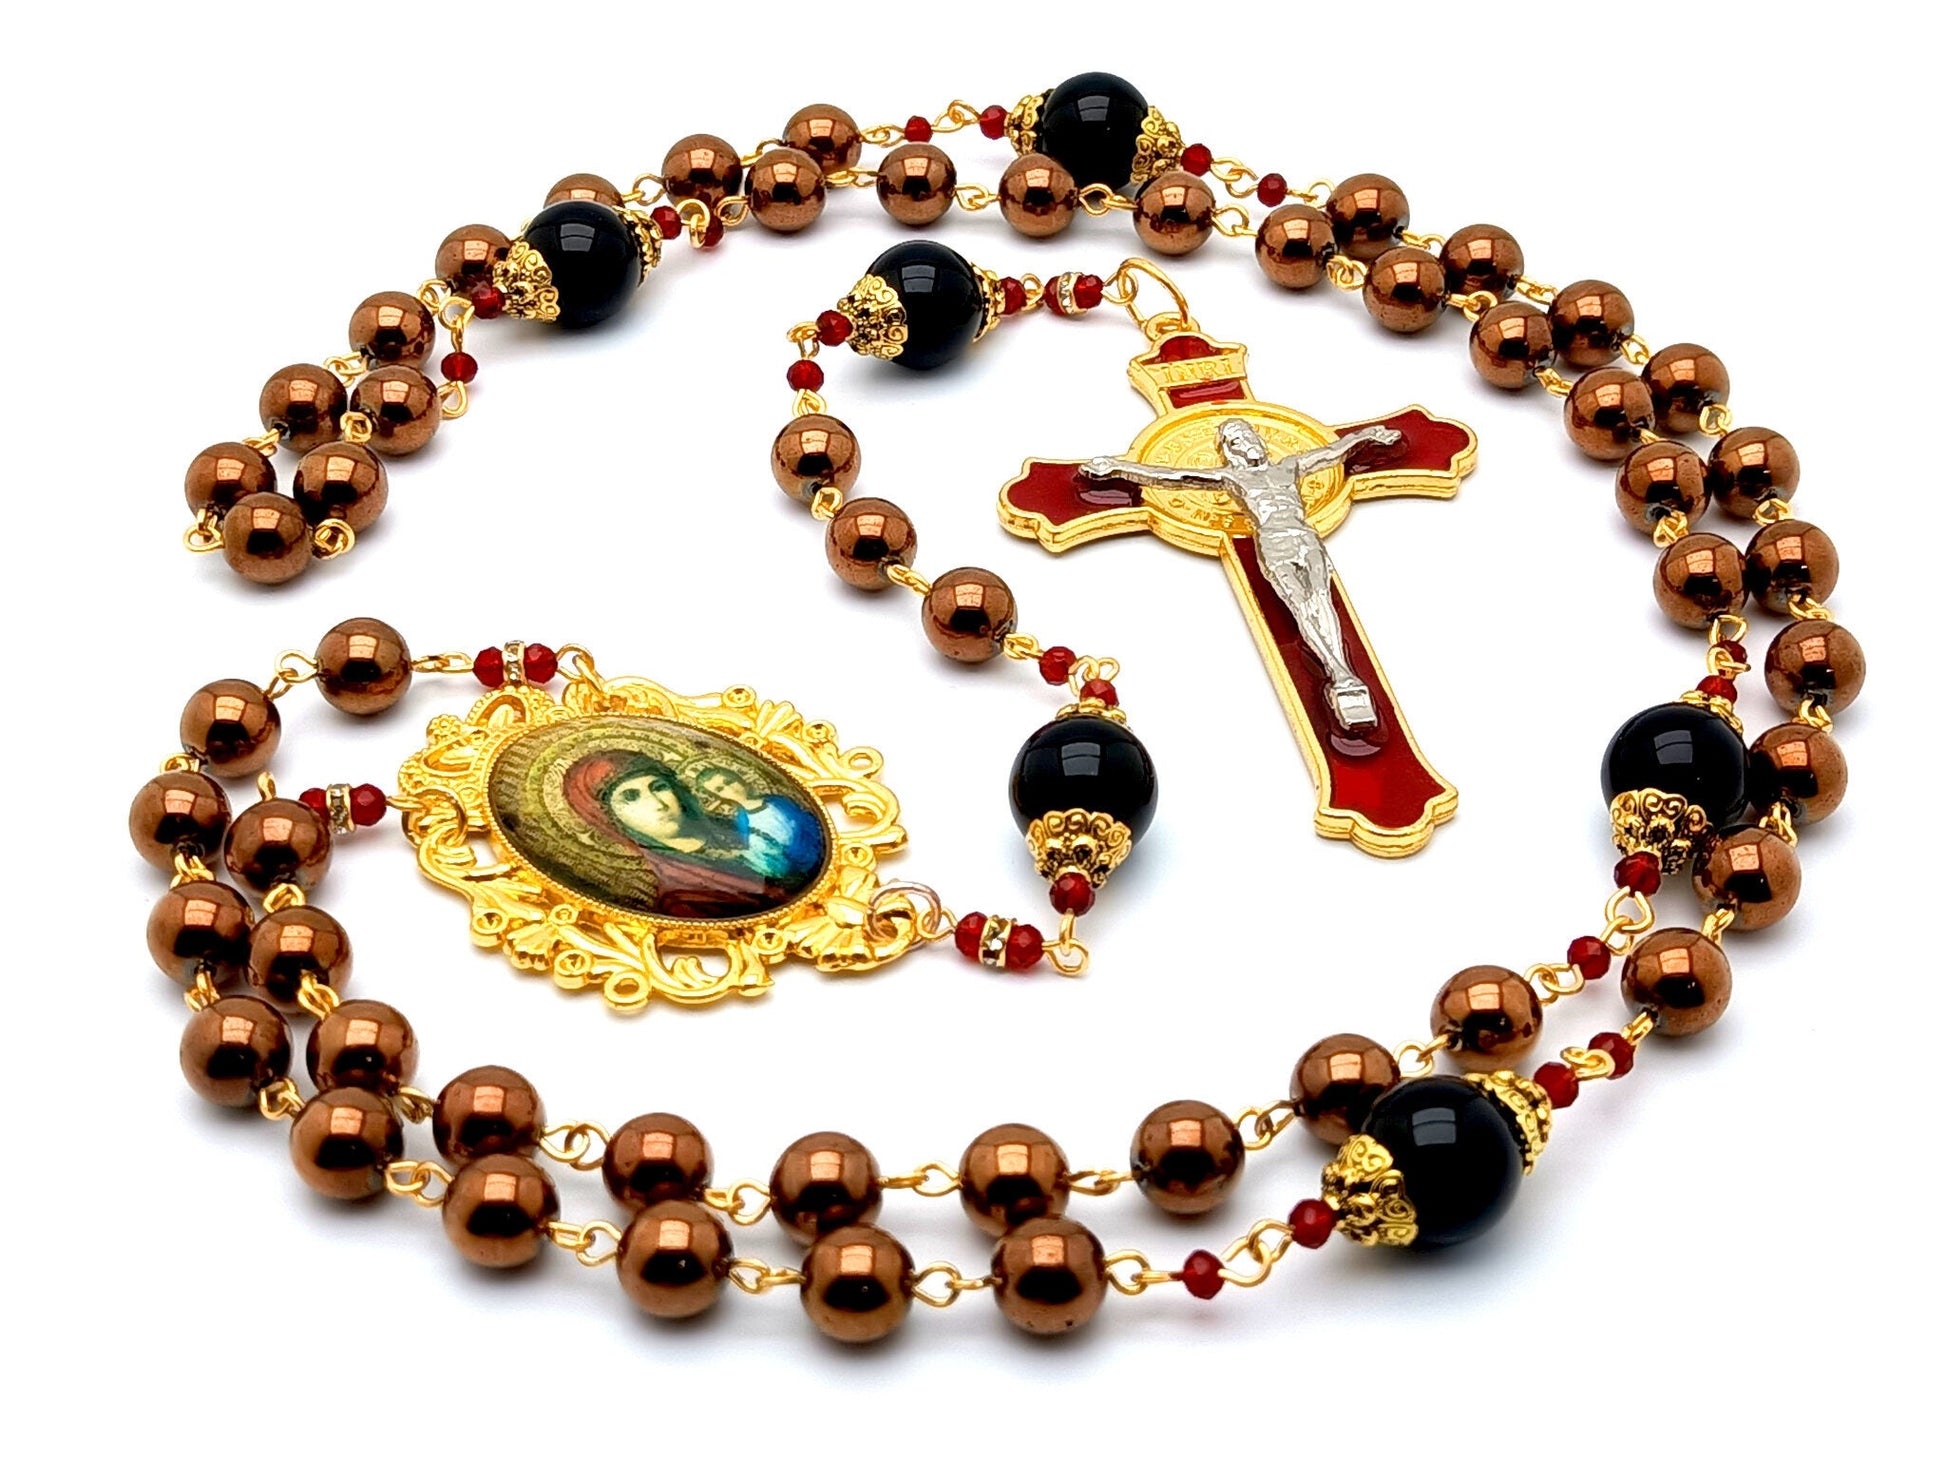 Our Lady of Perpetual Help unique rosary beads with hematite and onyx gemstone beads and red and gold enamel Saint Benedict crucifix.